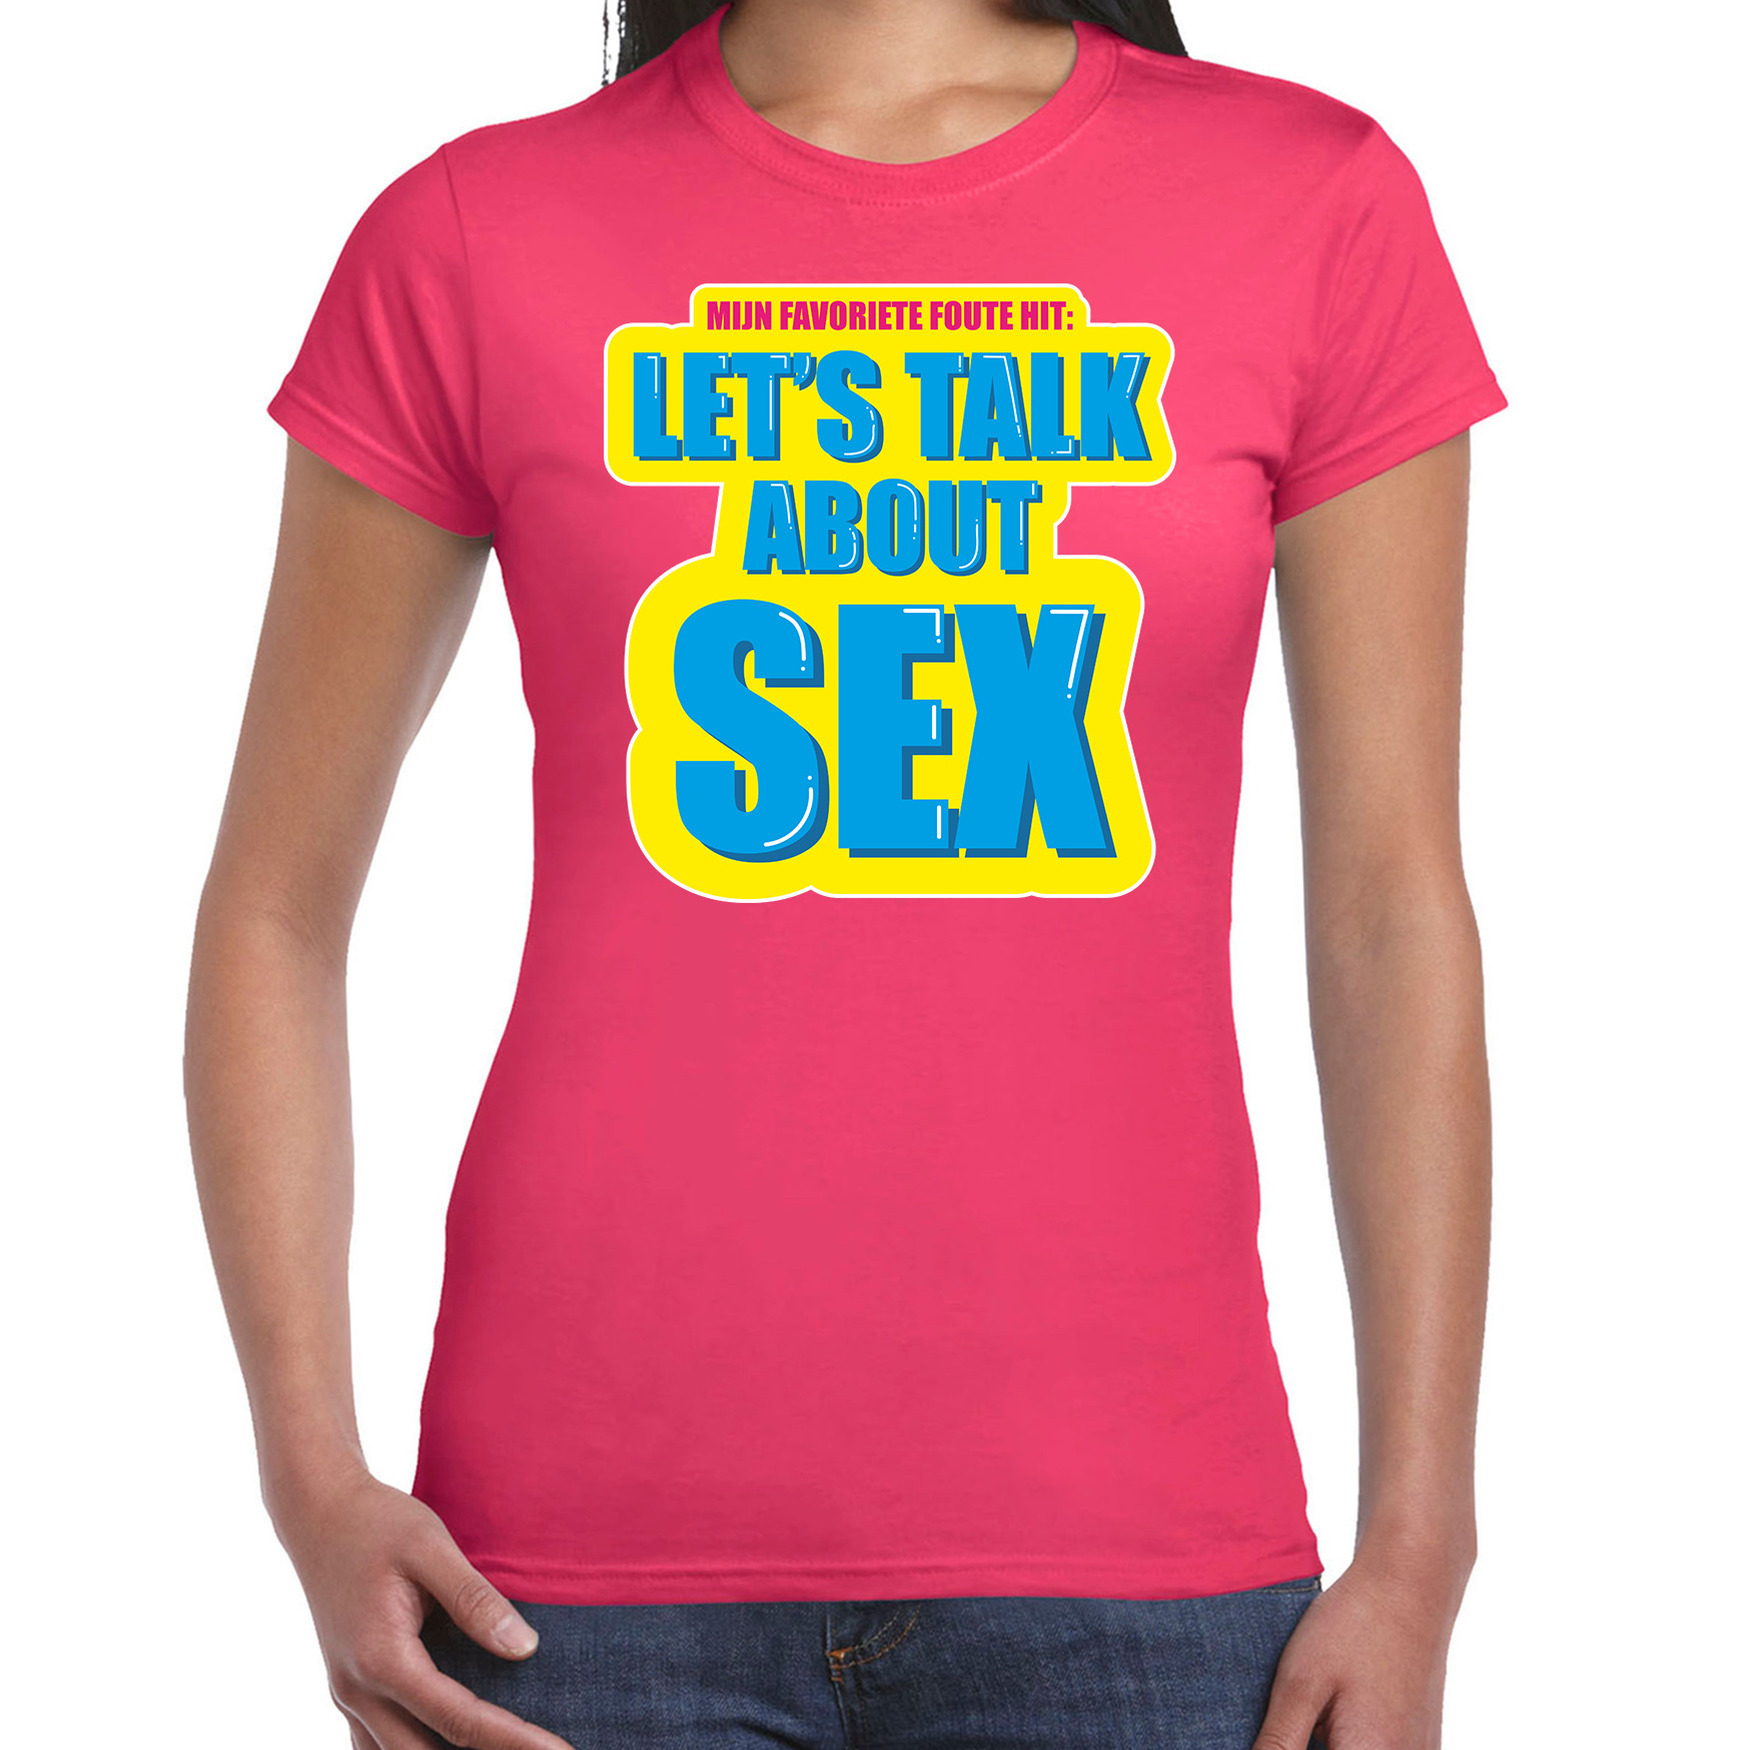 Foute party Let s talk about sex verkleed t-shirt roze dames Foute party hits outfit- kleding